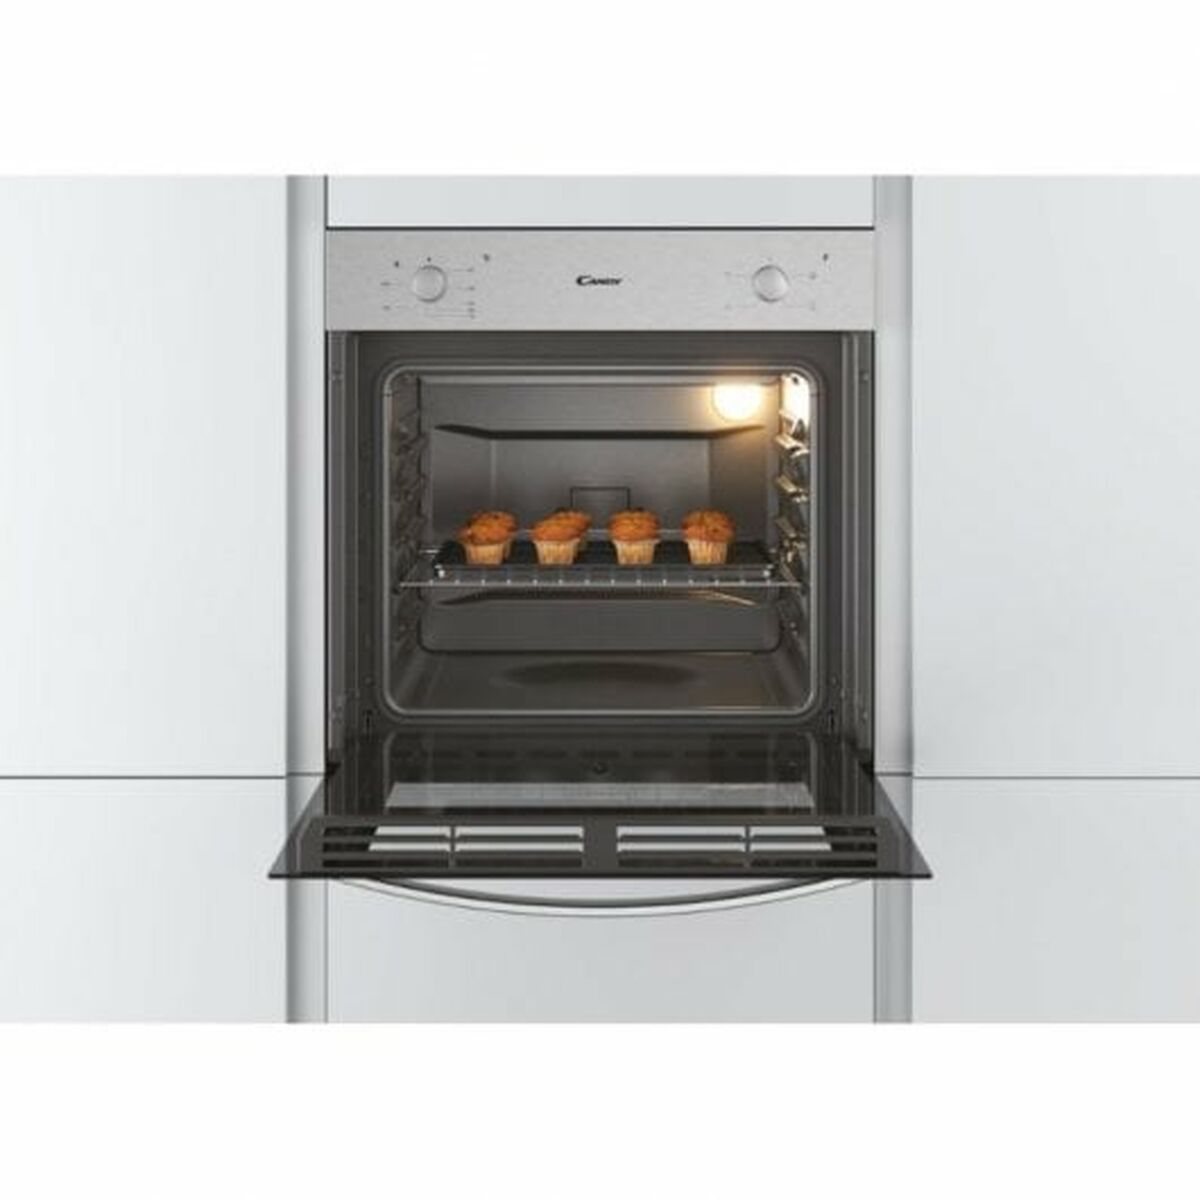 Multifunctionele Oven Candy FCS 100 X 2100 W 70 L